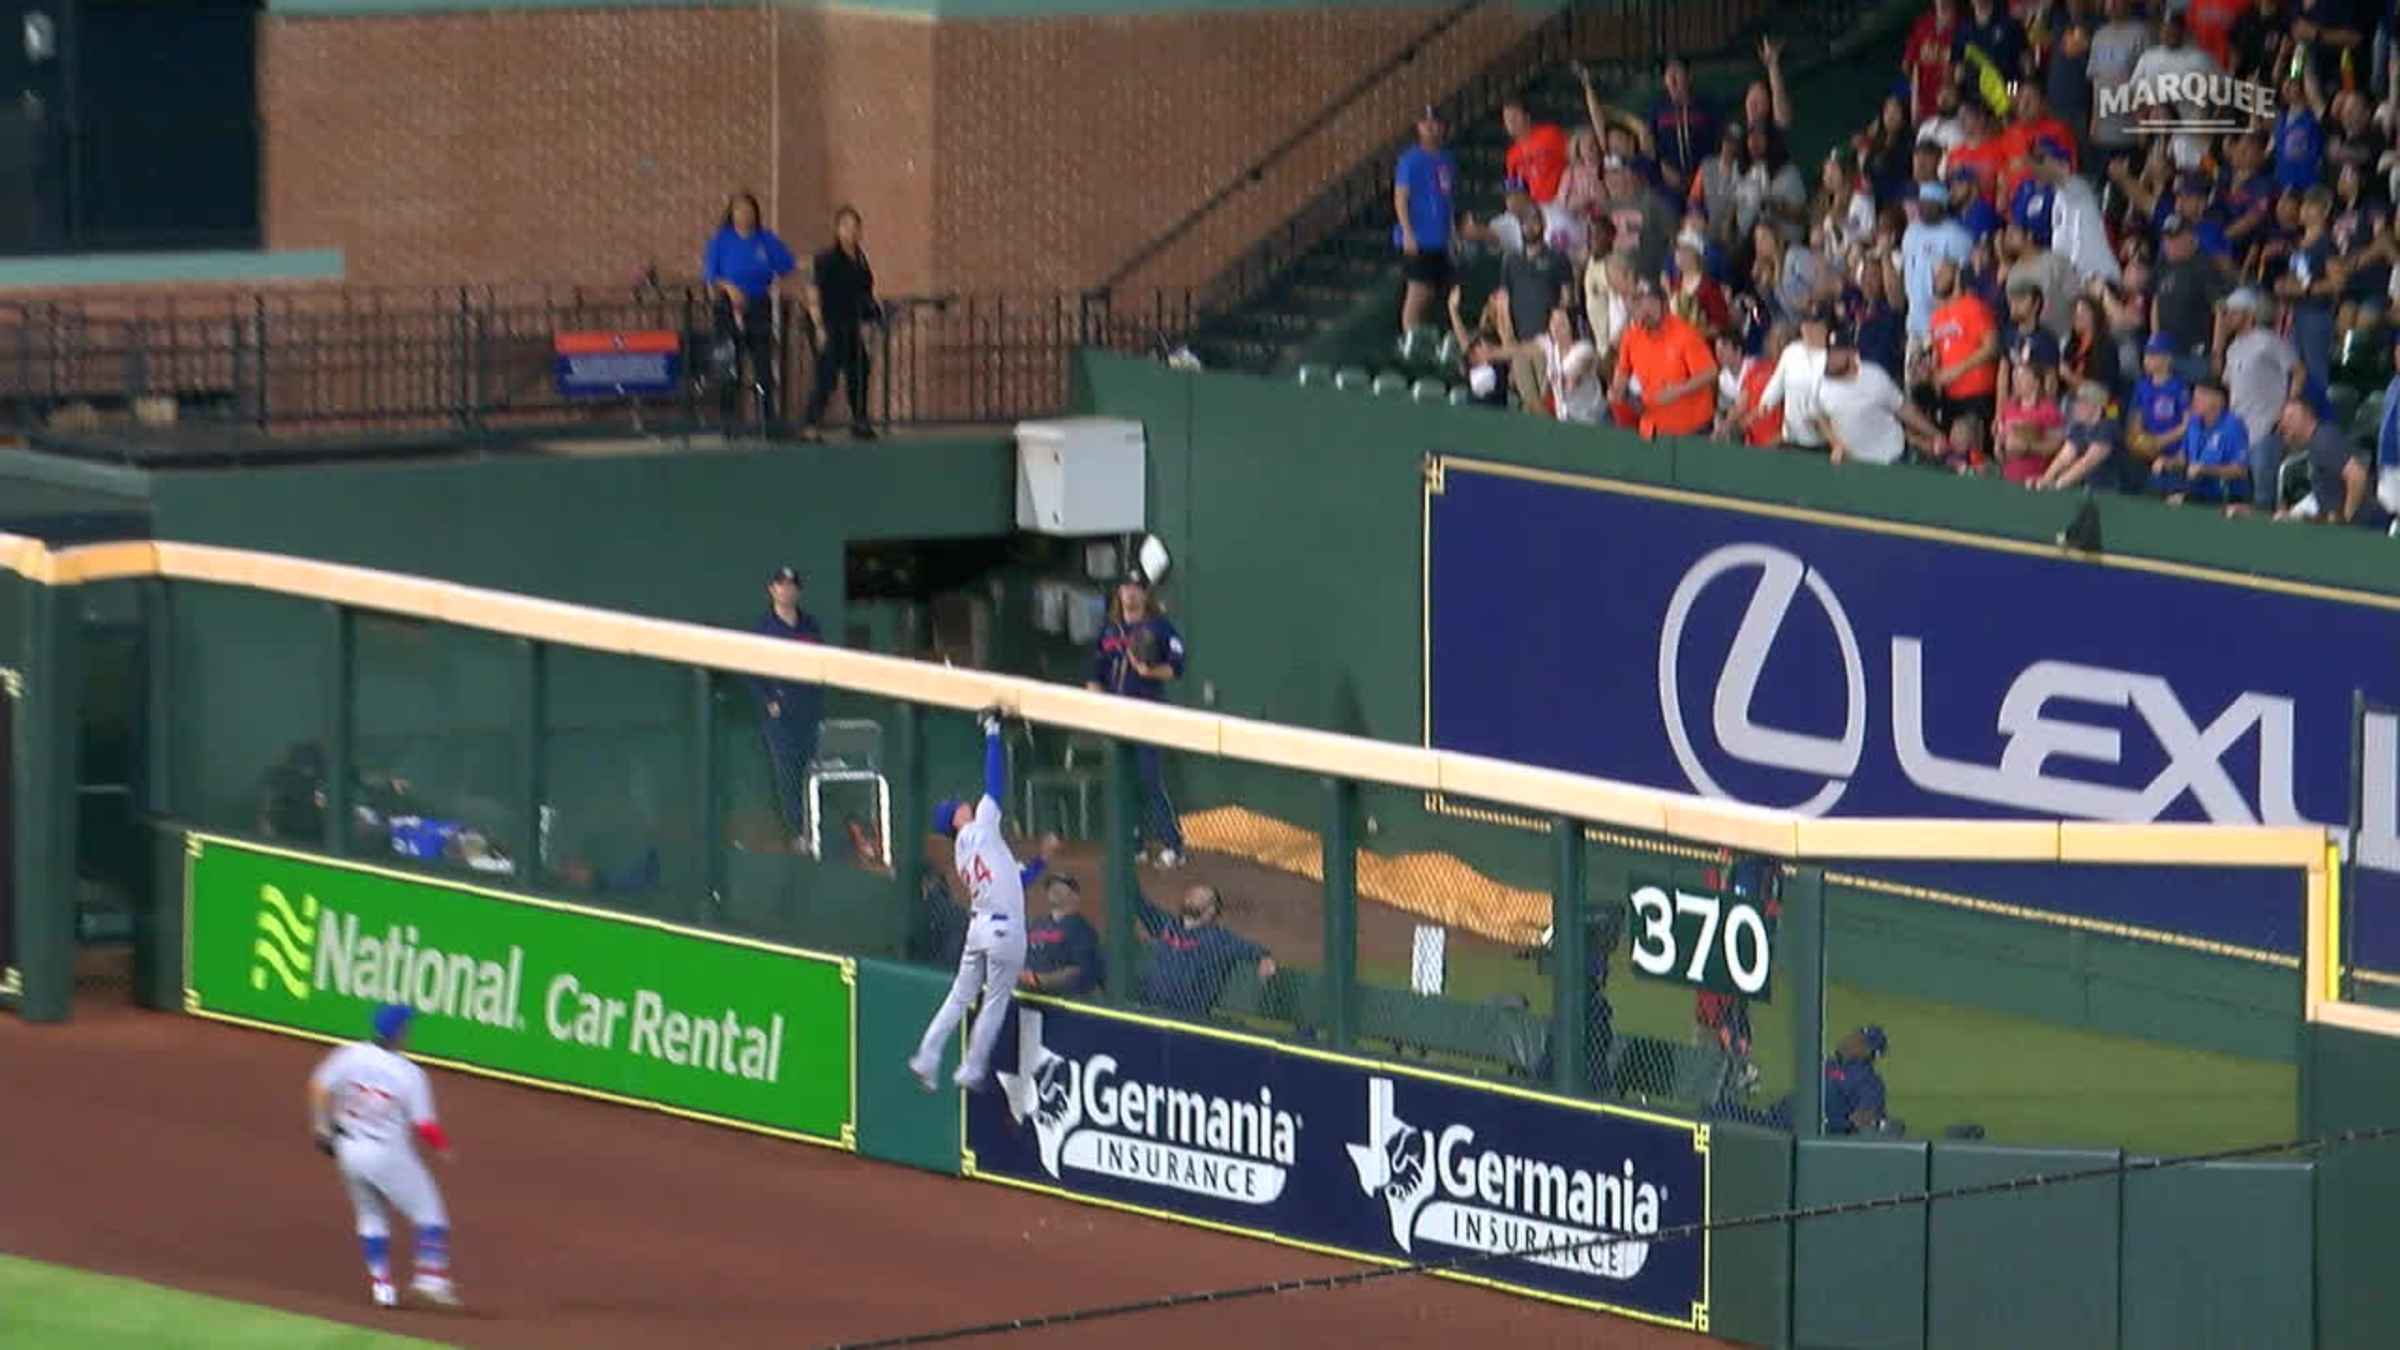 Cubs' Cody Bellinger makes incredible leaping catch to rob home run,  appears to tweak ankle